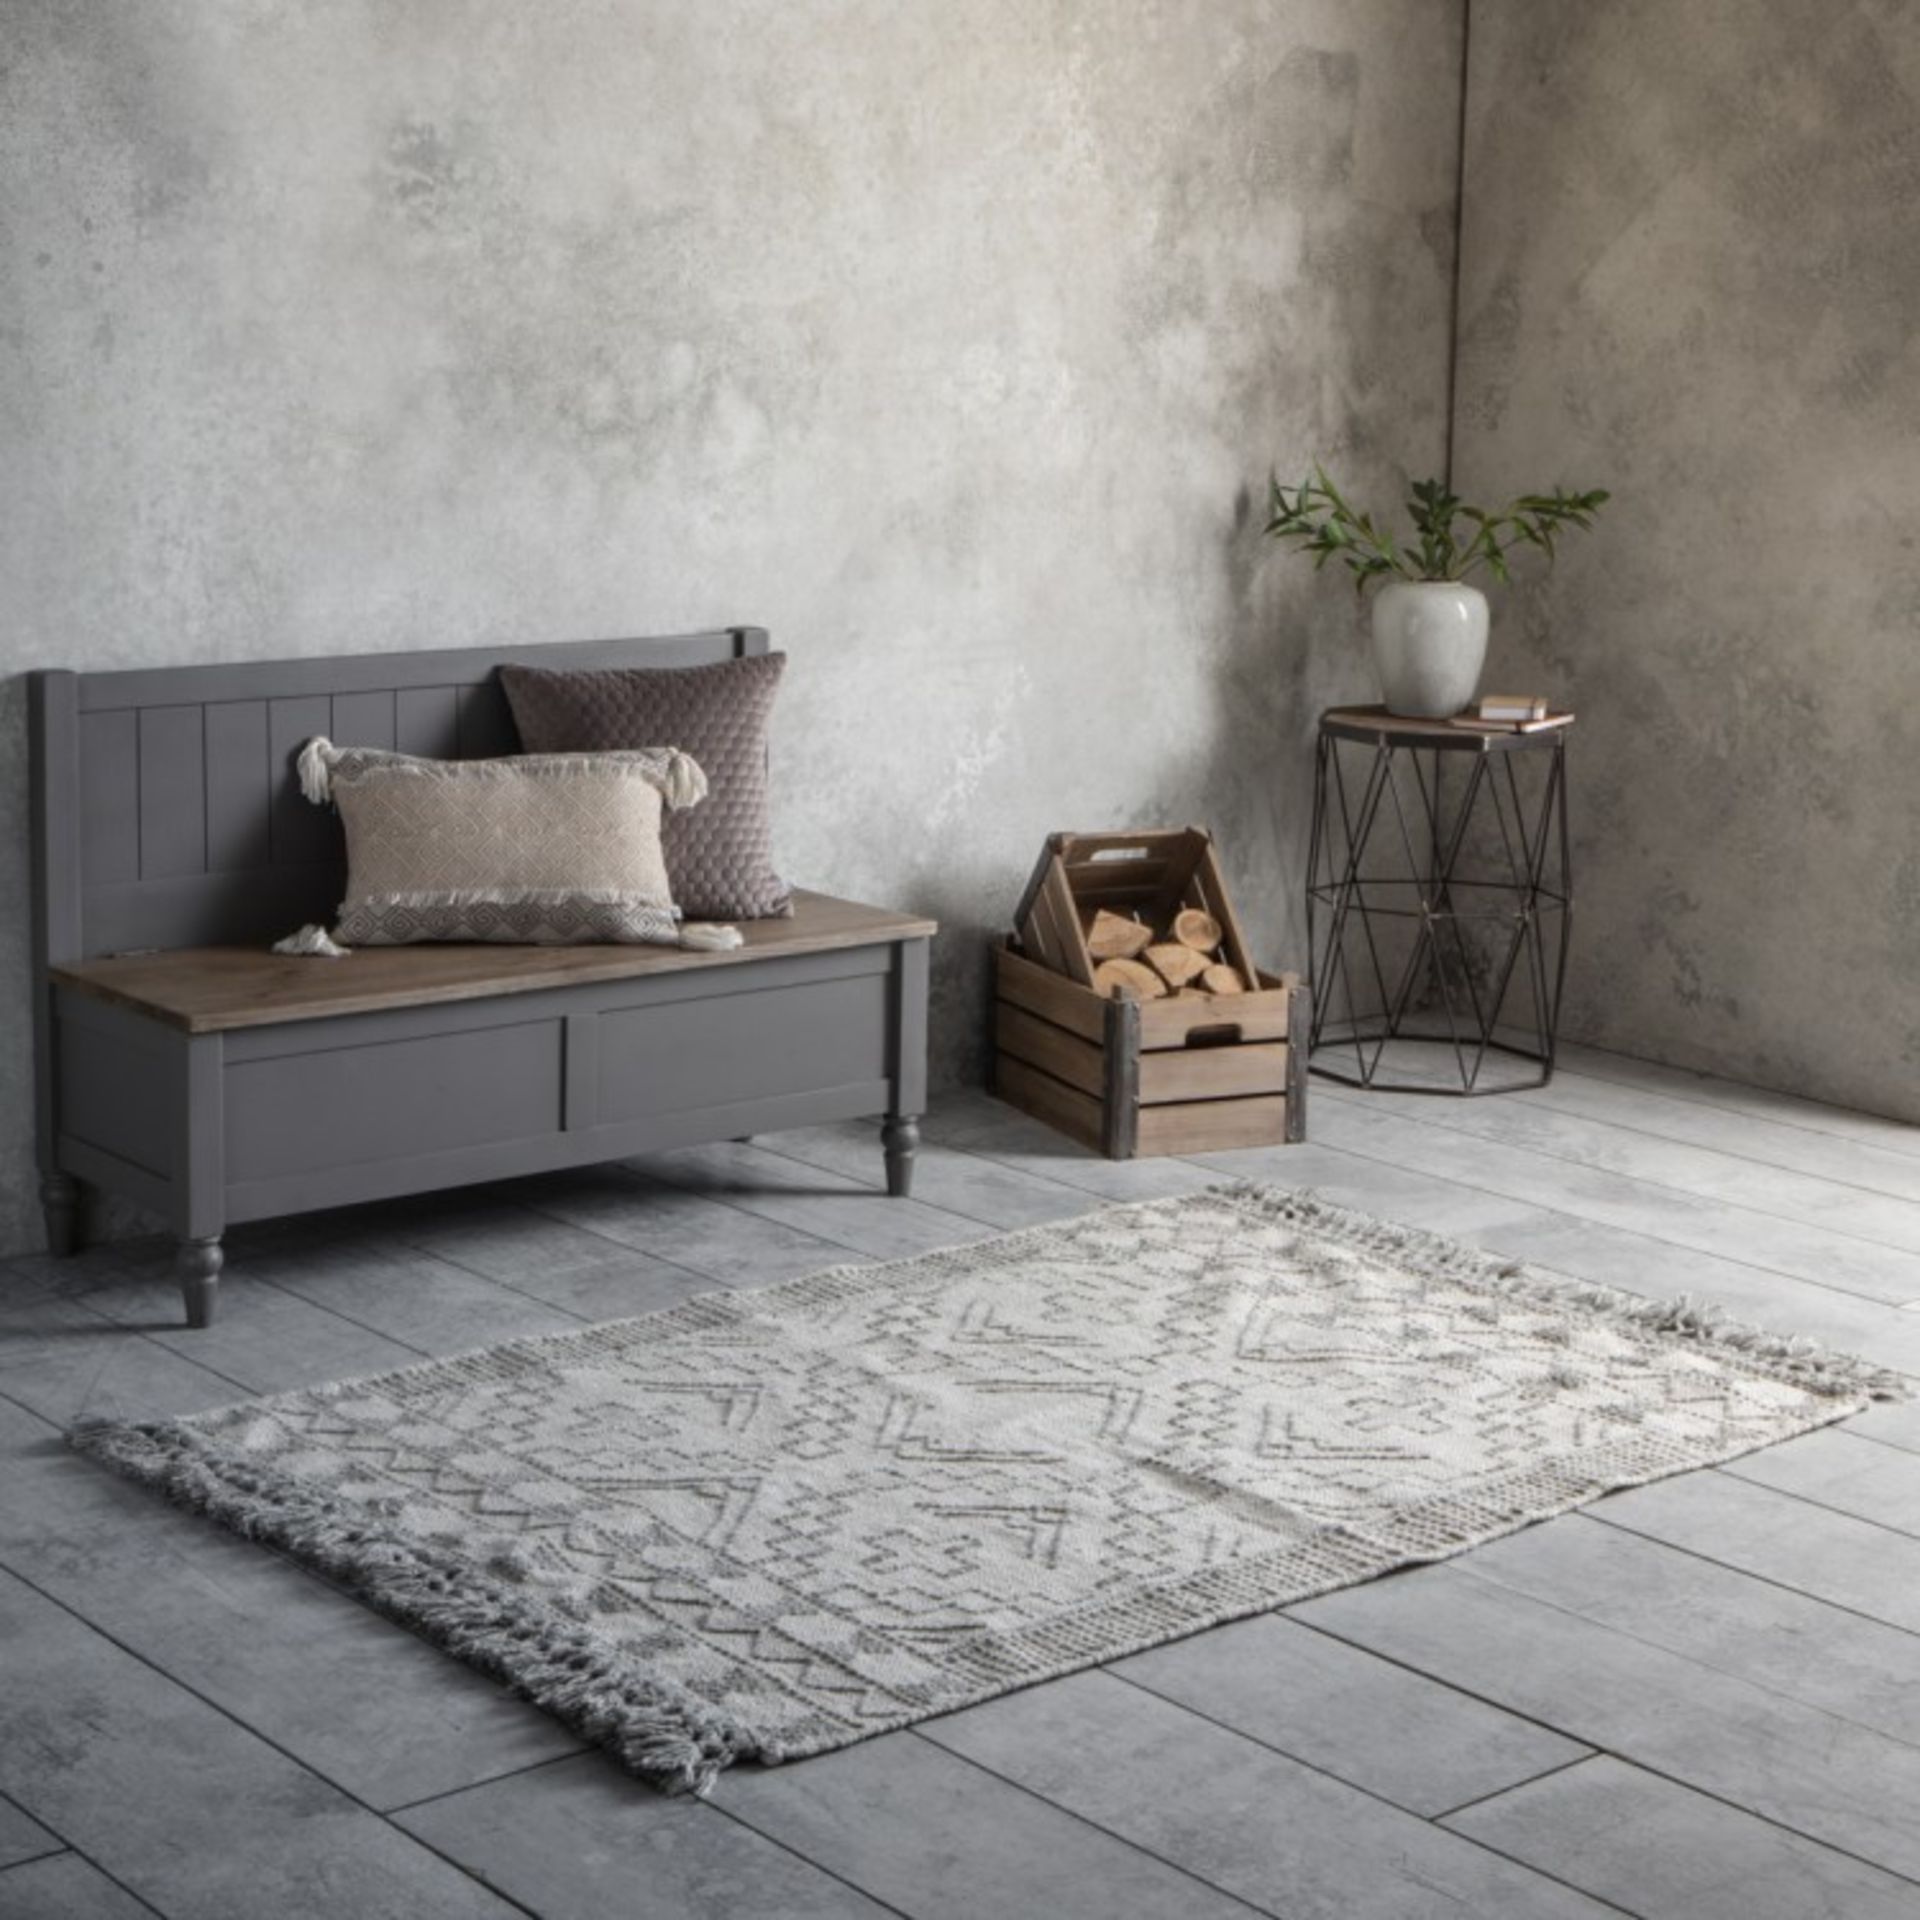 Peru Rug Captures The Essence Of Traditional Style This Sandy Coloured Rug Adds A Calming Affect